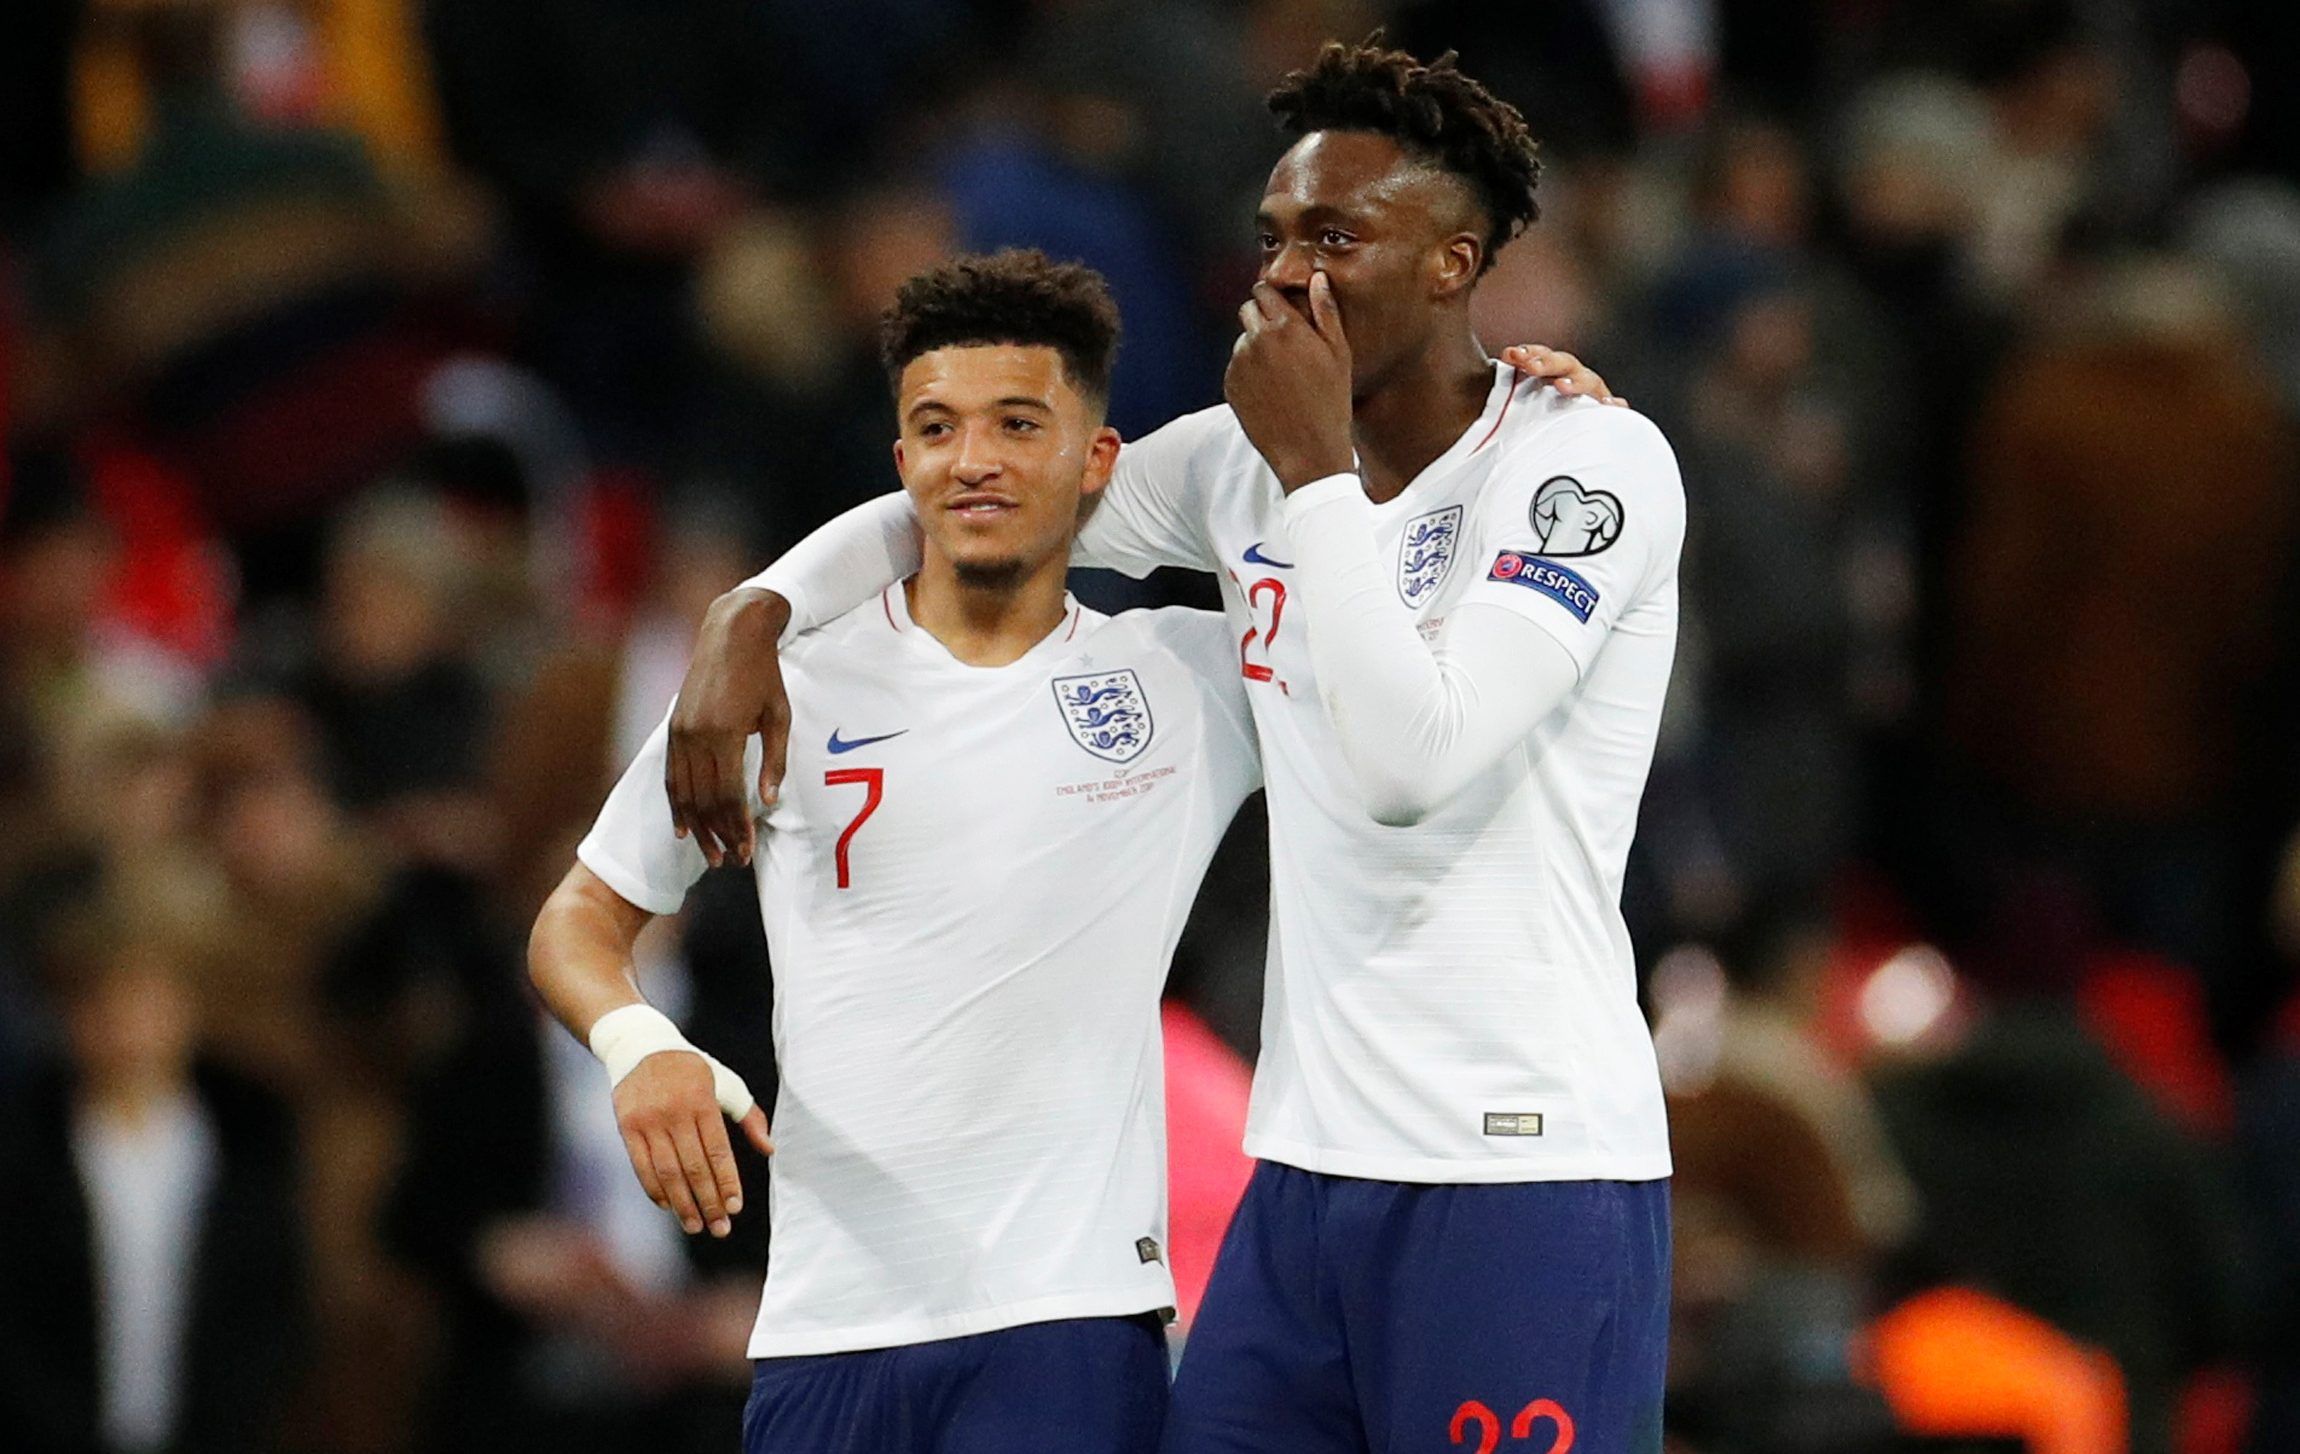 Soccer Football - Euro 2020 Qualifier - Group A - England v Montenegro - Wembley Stadium, London, Britain - November 14, 2019  England's Jadon Sancho and Tammy Abraham celebrate after the match   Action Images via Reuters/John Sibley